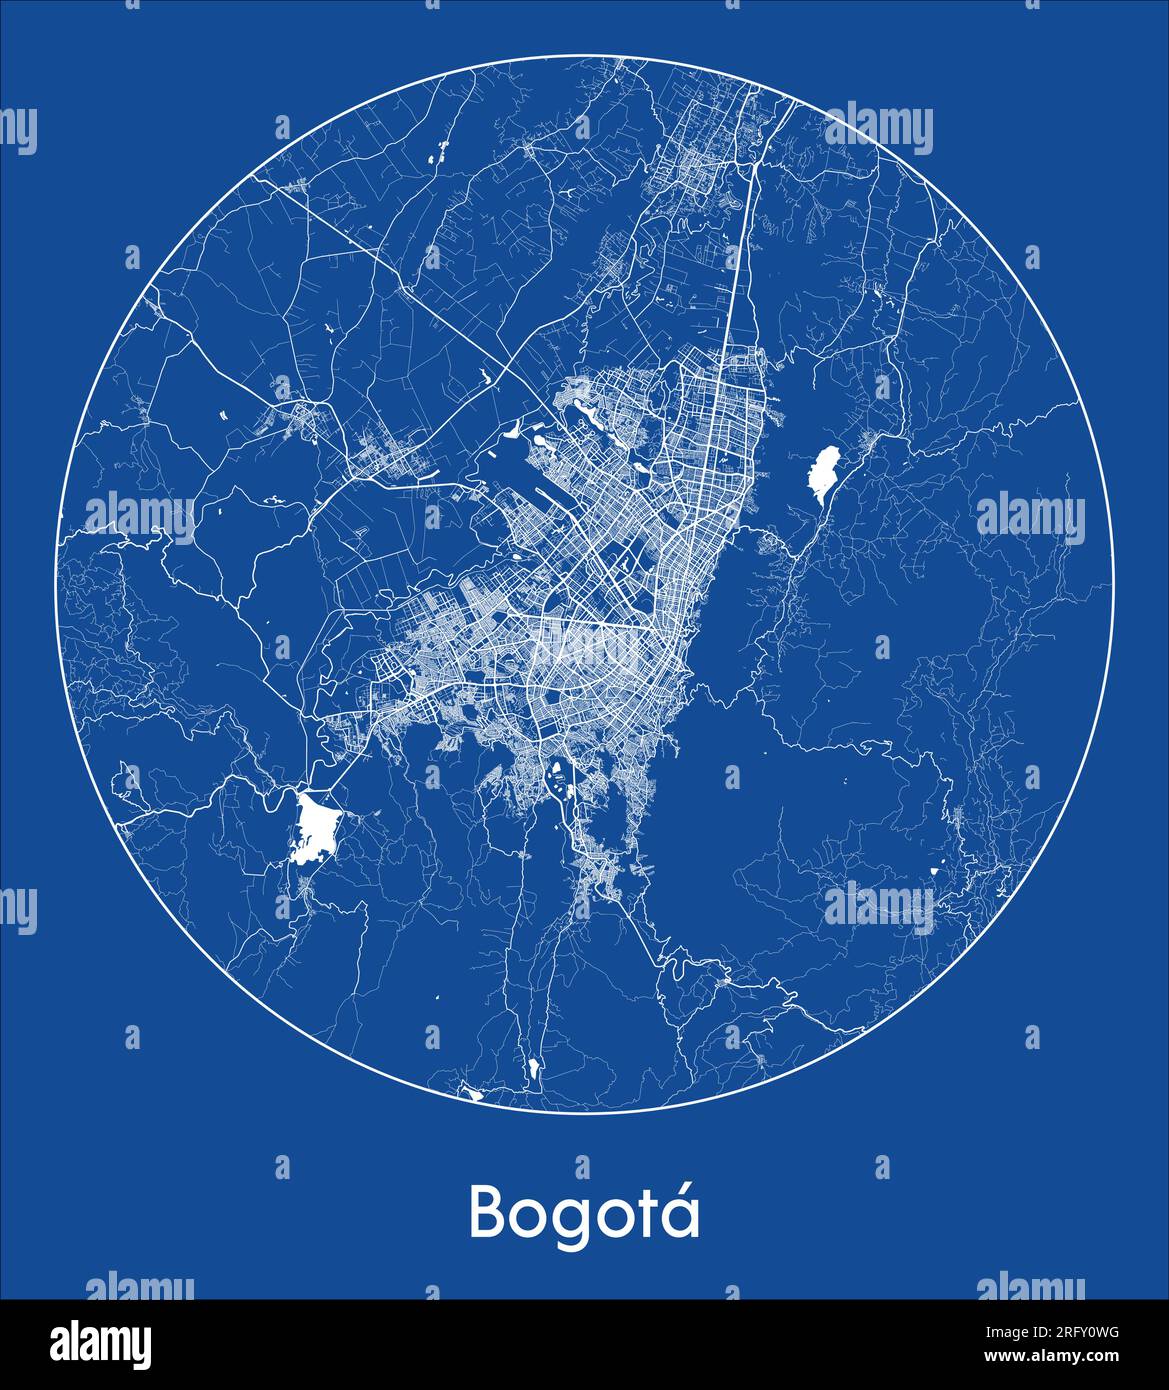 City Map Bogota Colombia South America blue print round Circle vector illustration Stock Vector